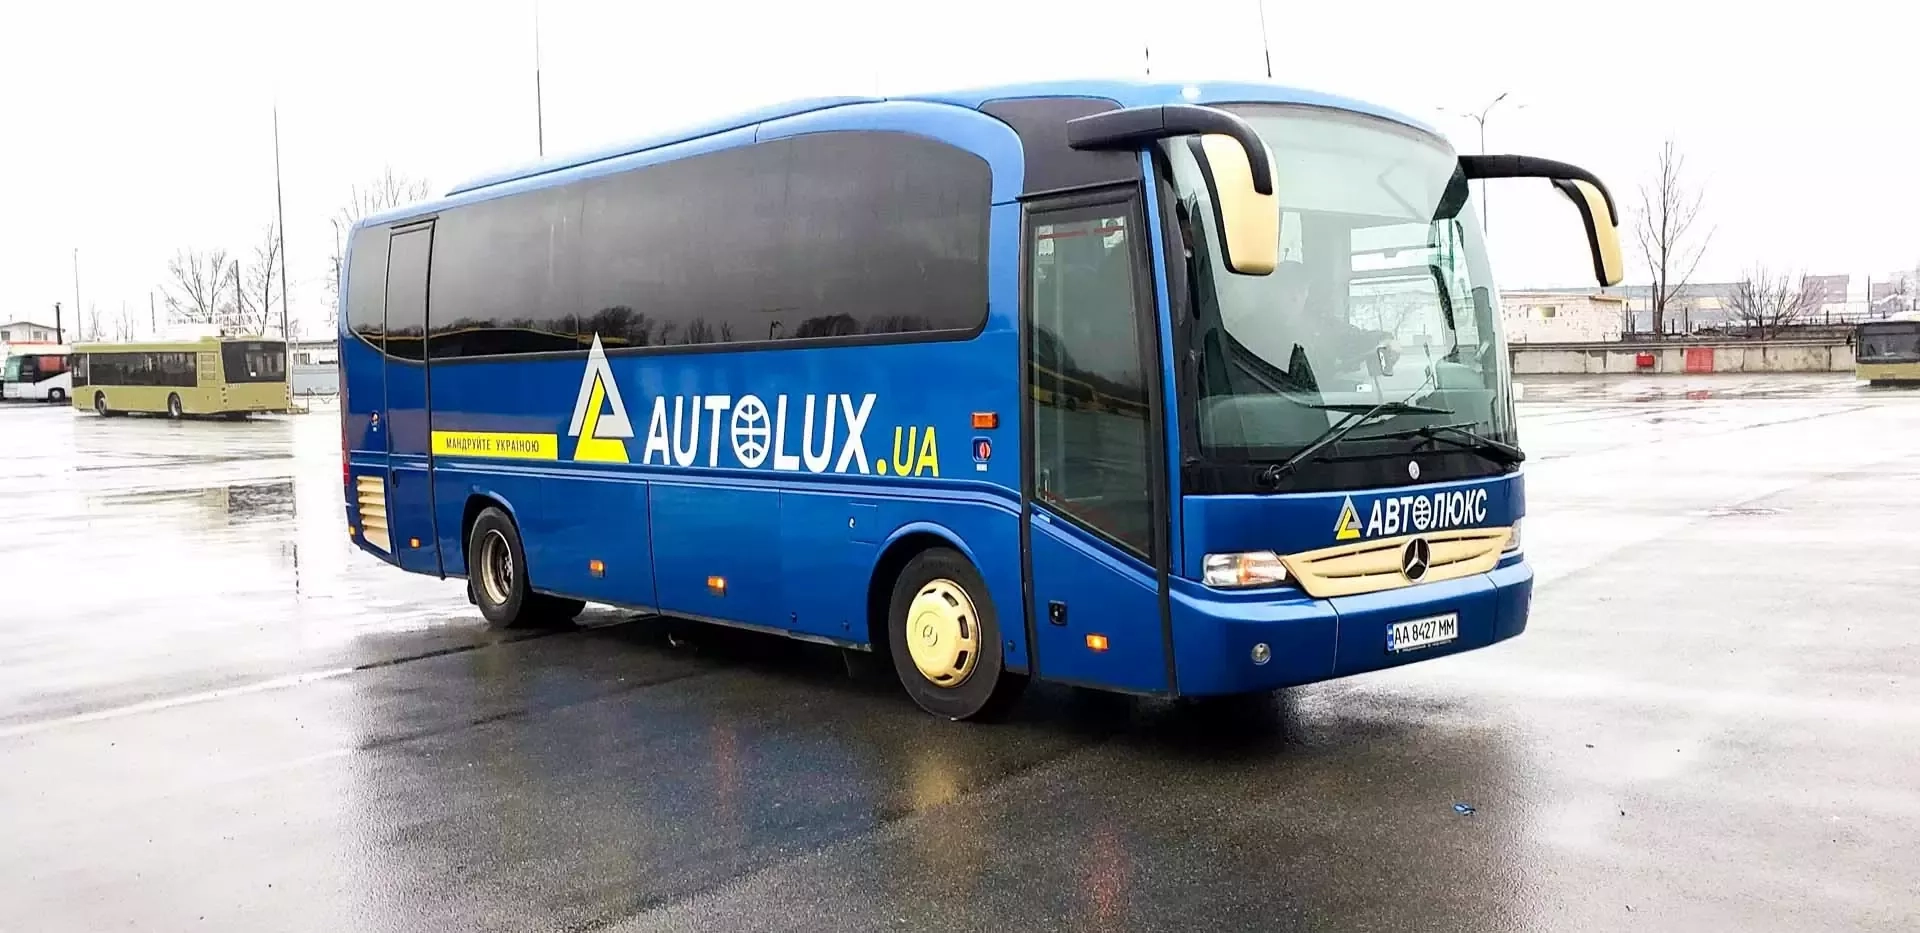 AUTOLUX RENEWS BUSES – THE LEADER SHOULD BE VISIBLE